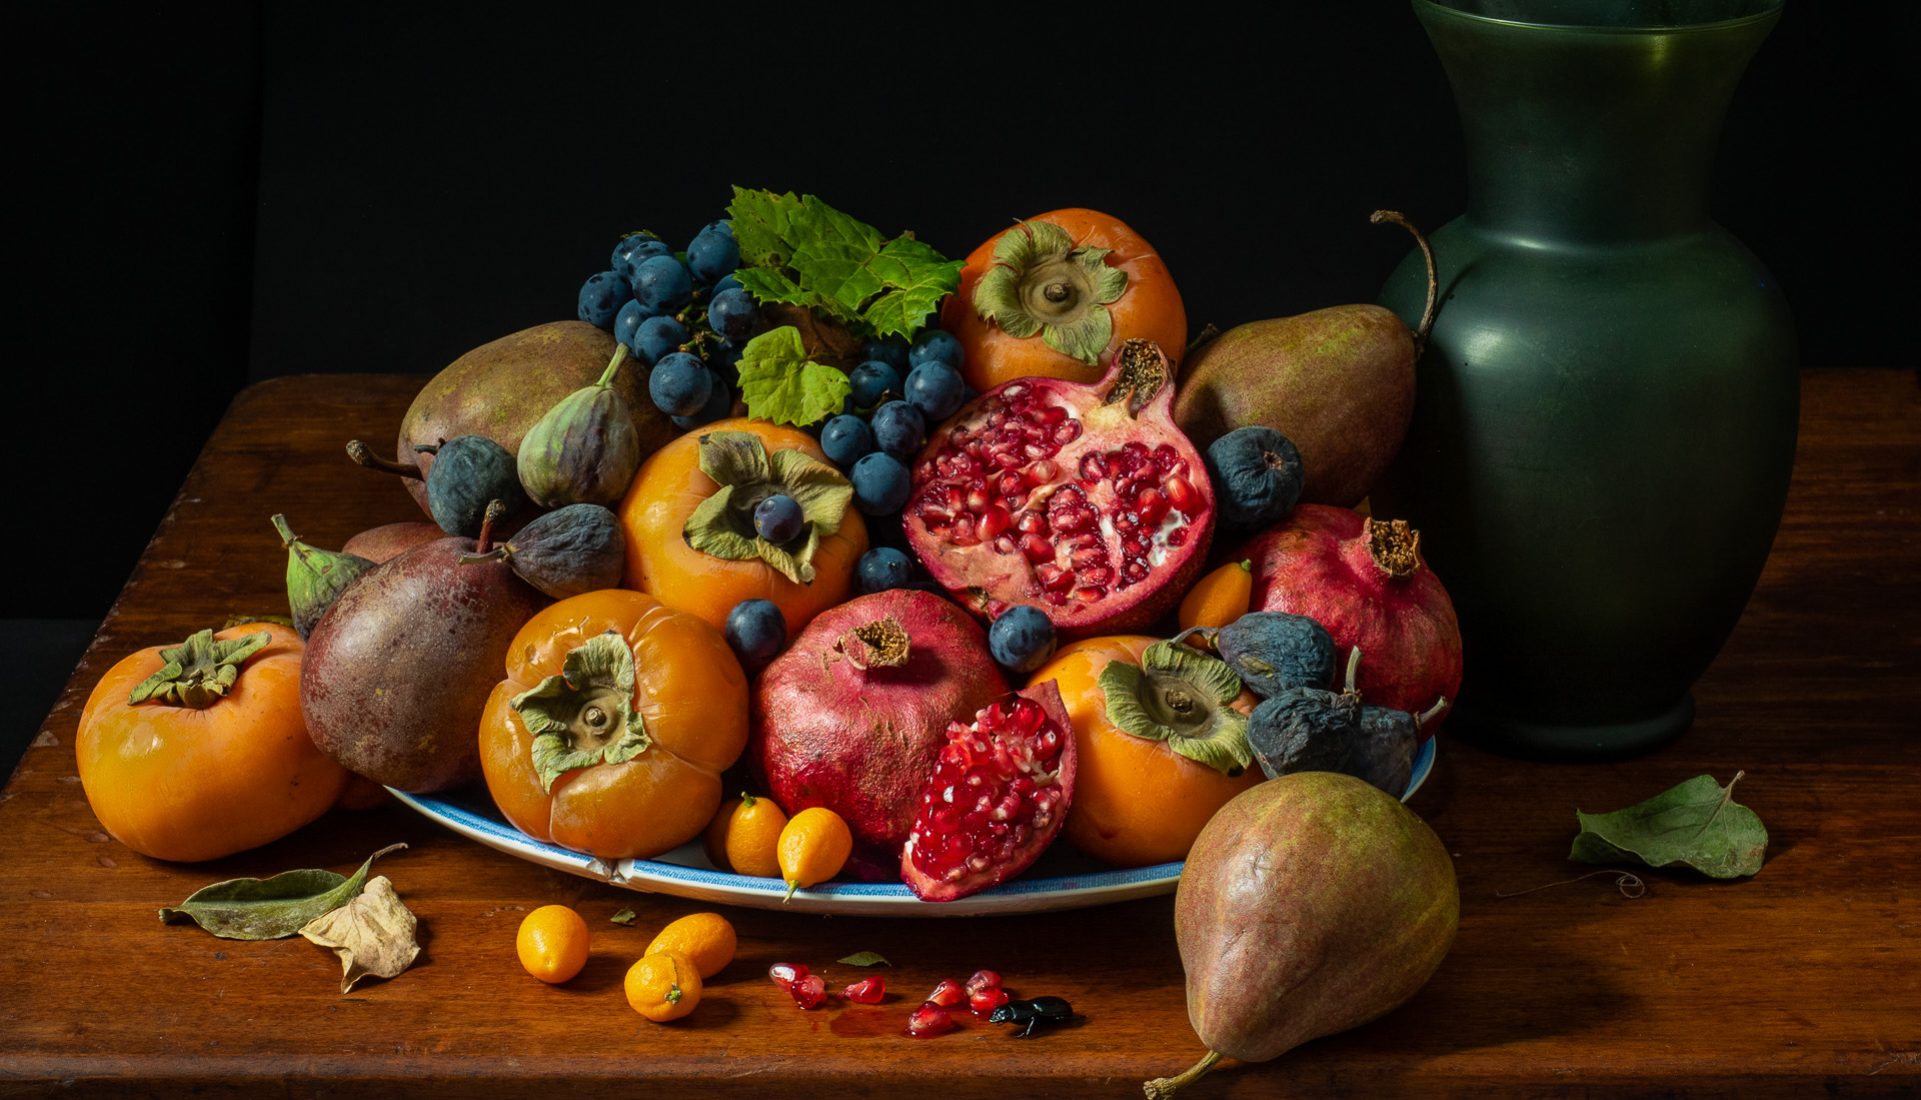 “Pomegranate and Persimmons” wins another award